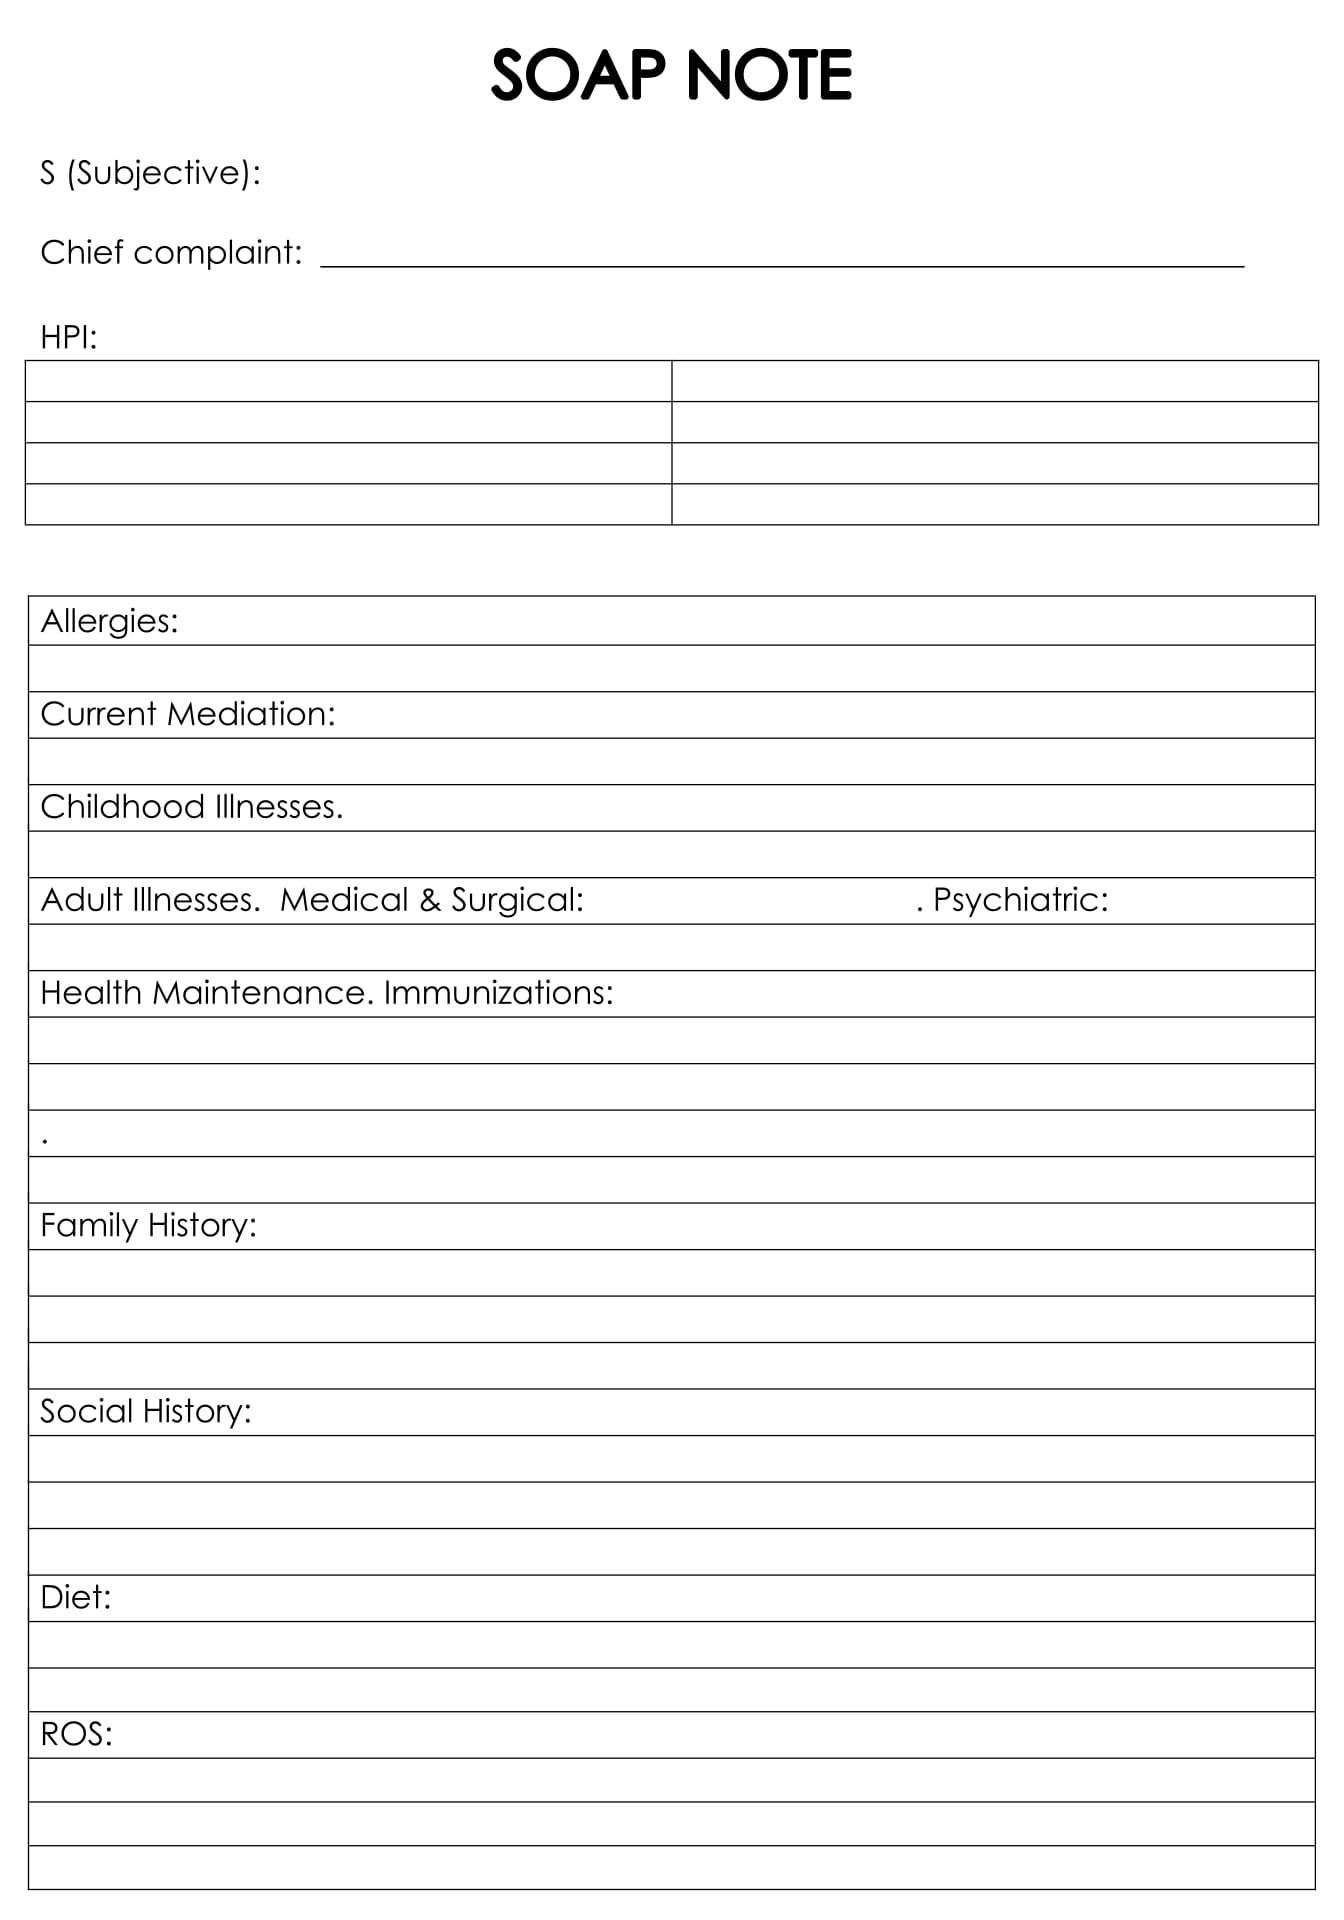 Printable Counseling SOAP Note Templates_22018